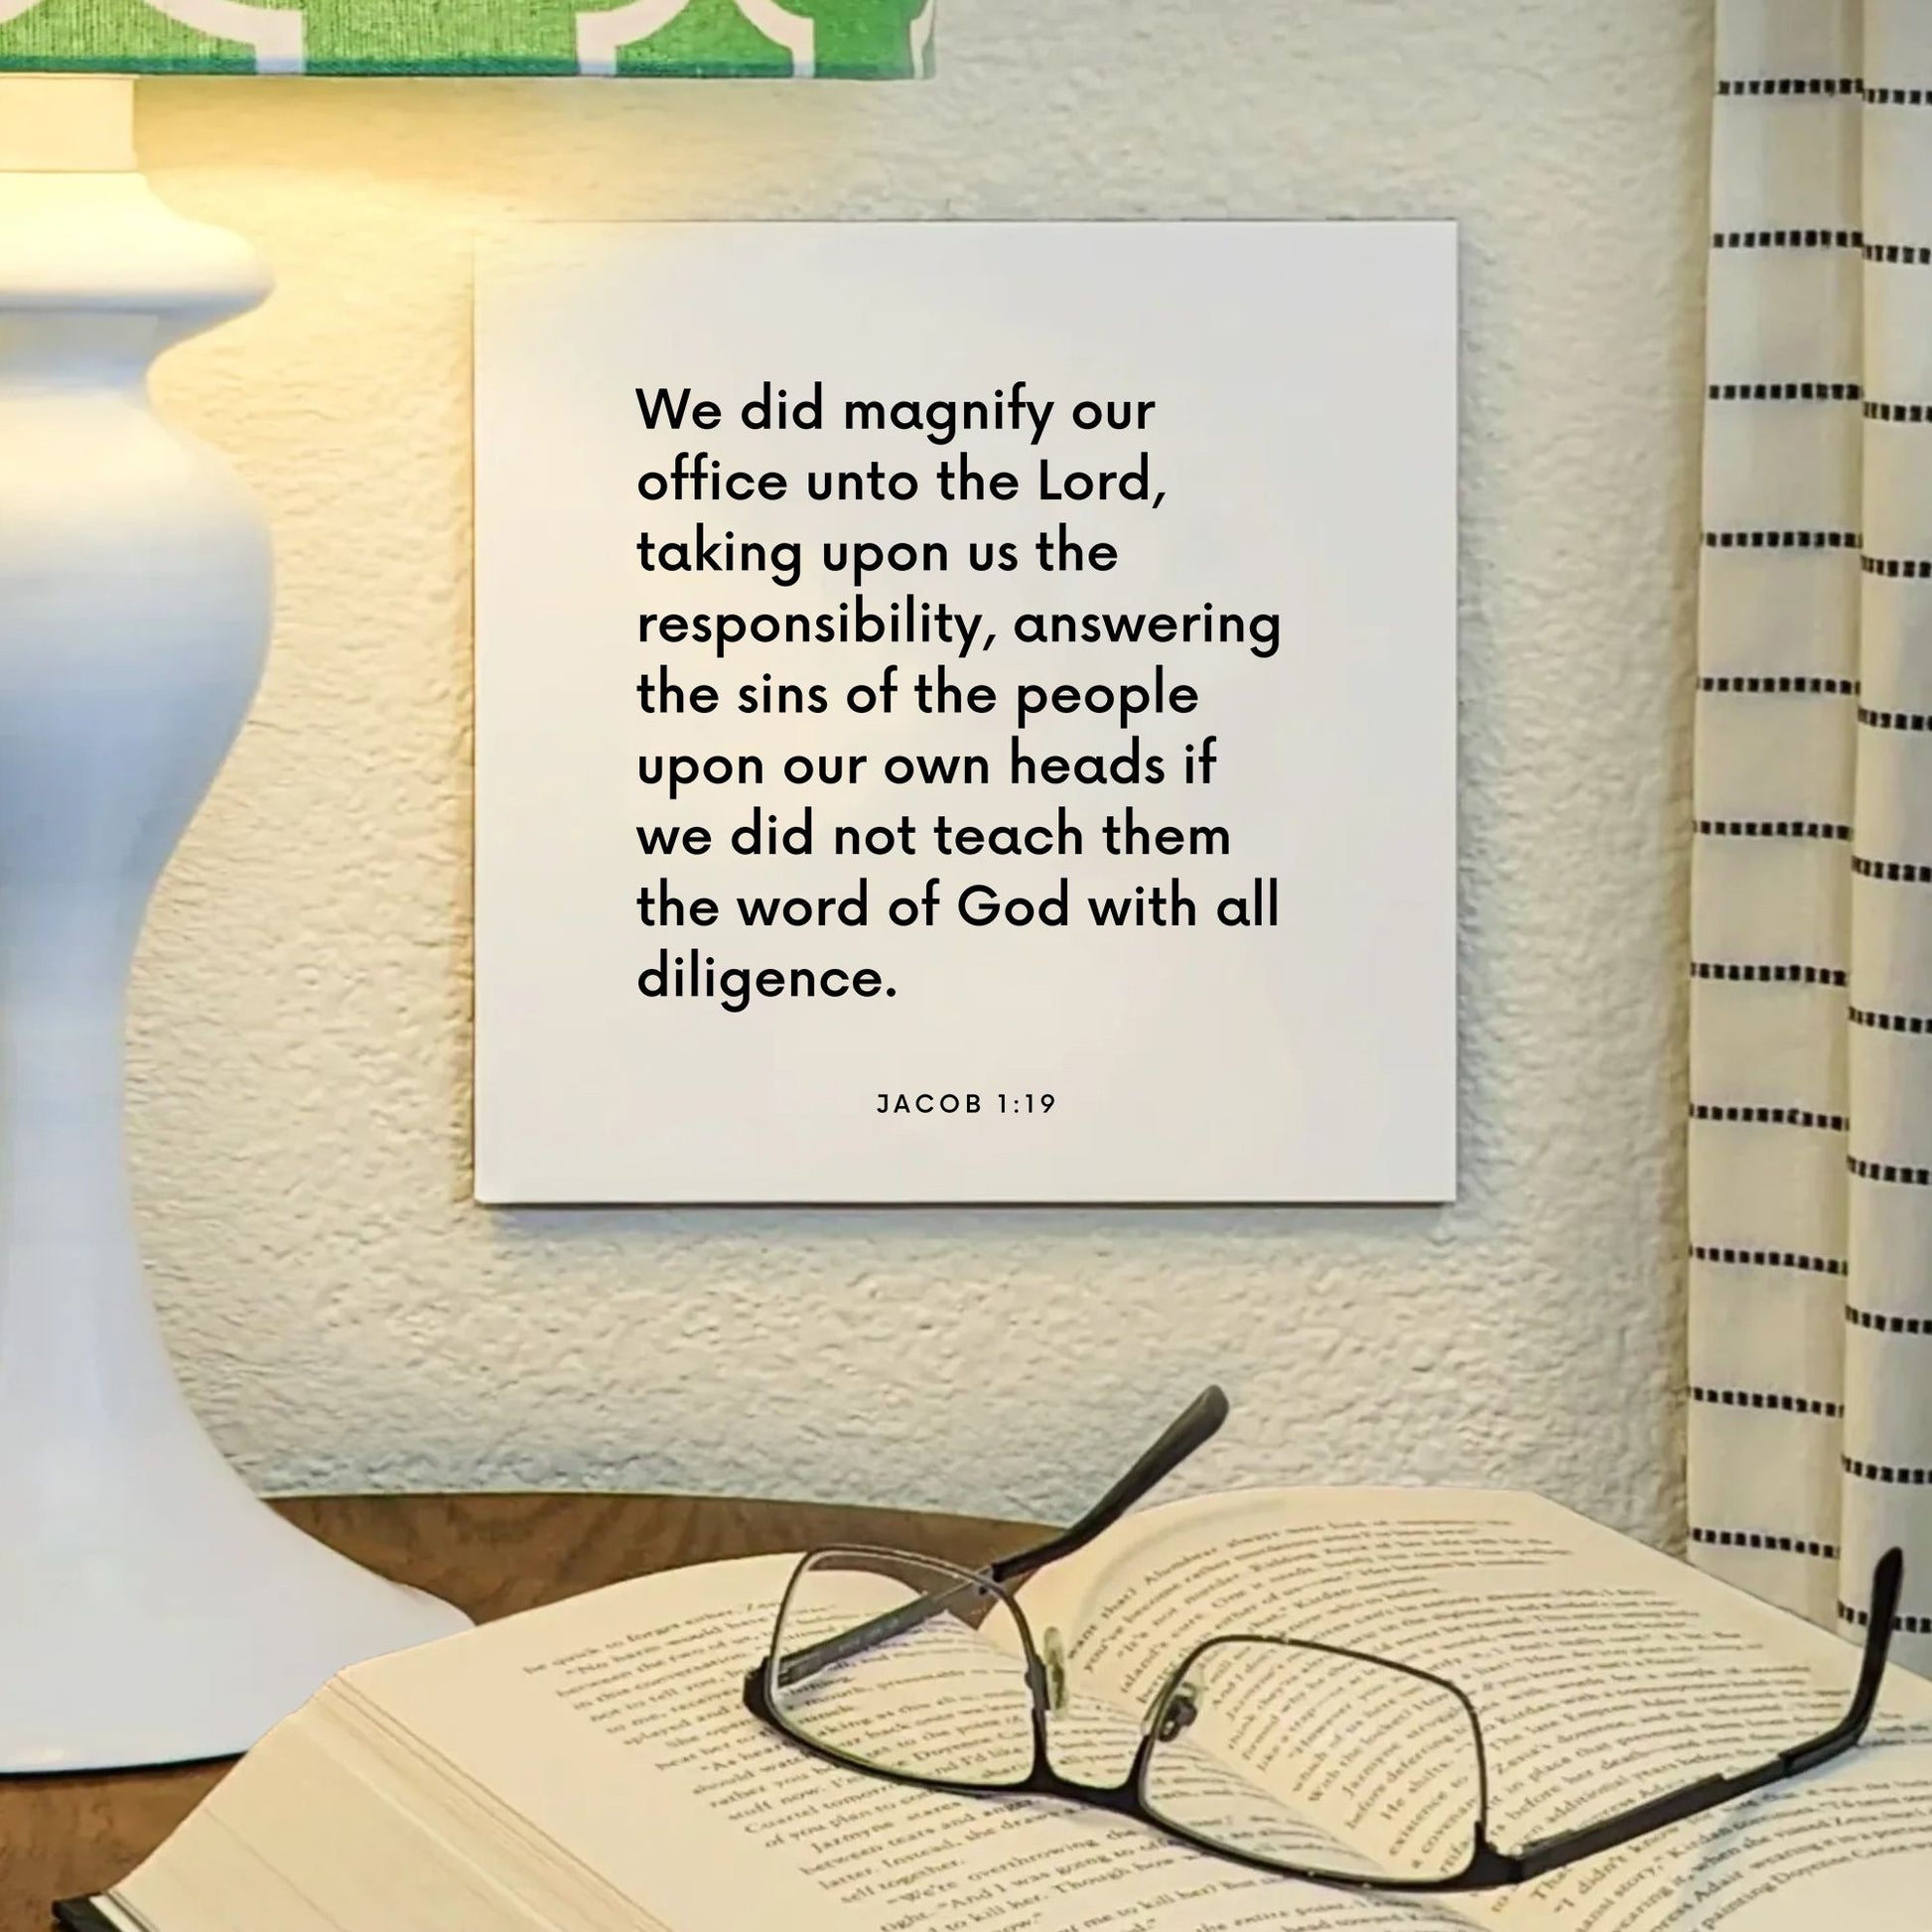 Lamp mouting of the scripture tile for Jacob 1:19 - "We did magnify our office unto the Lord"